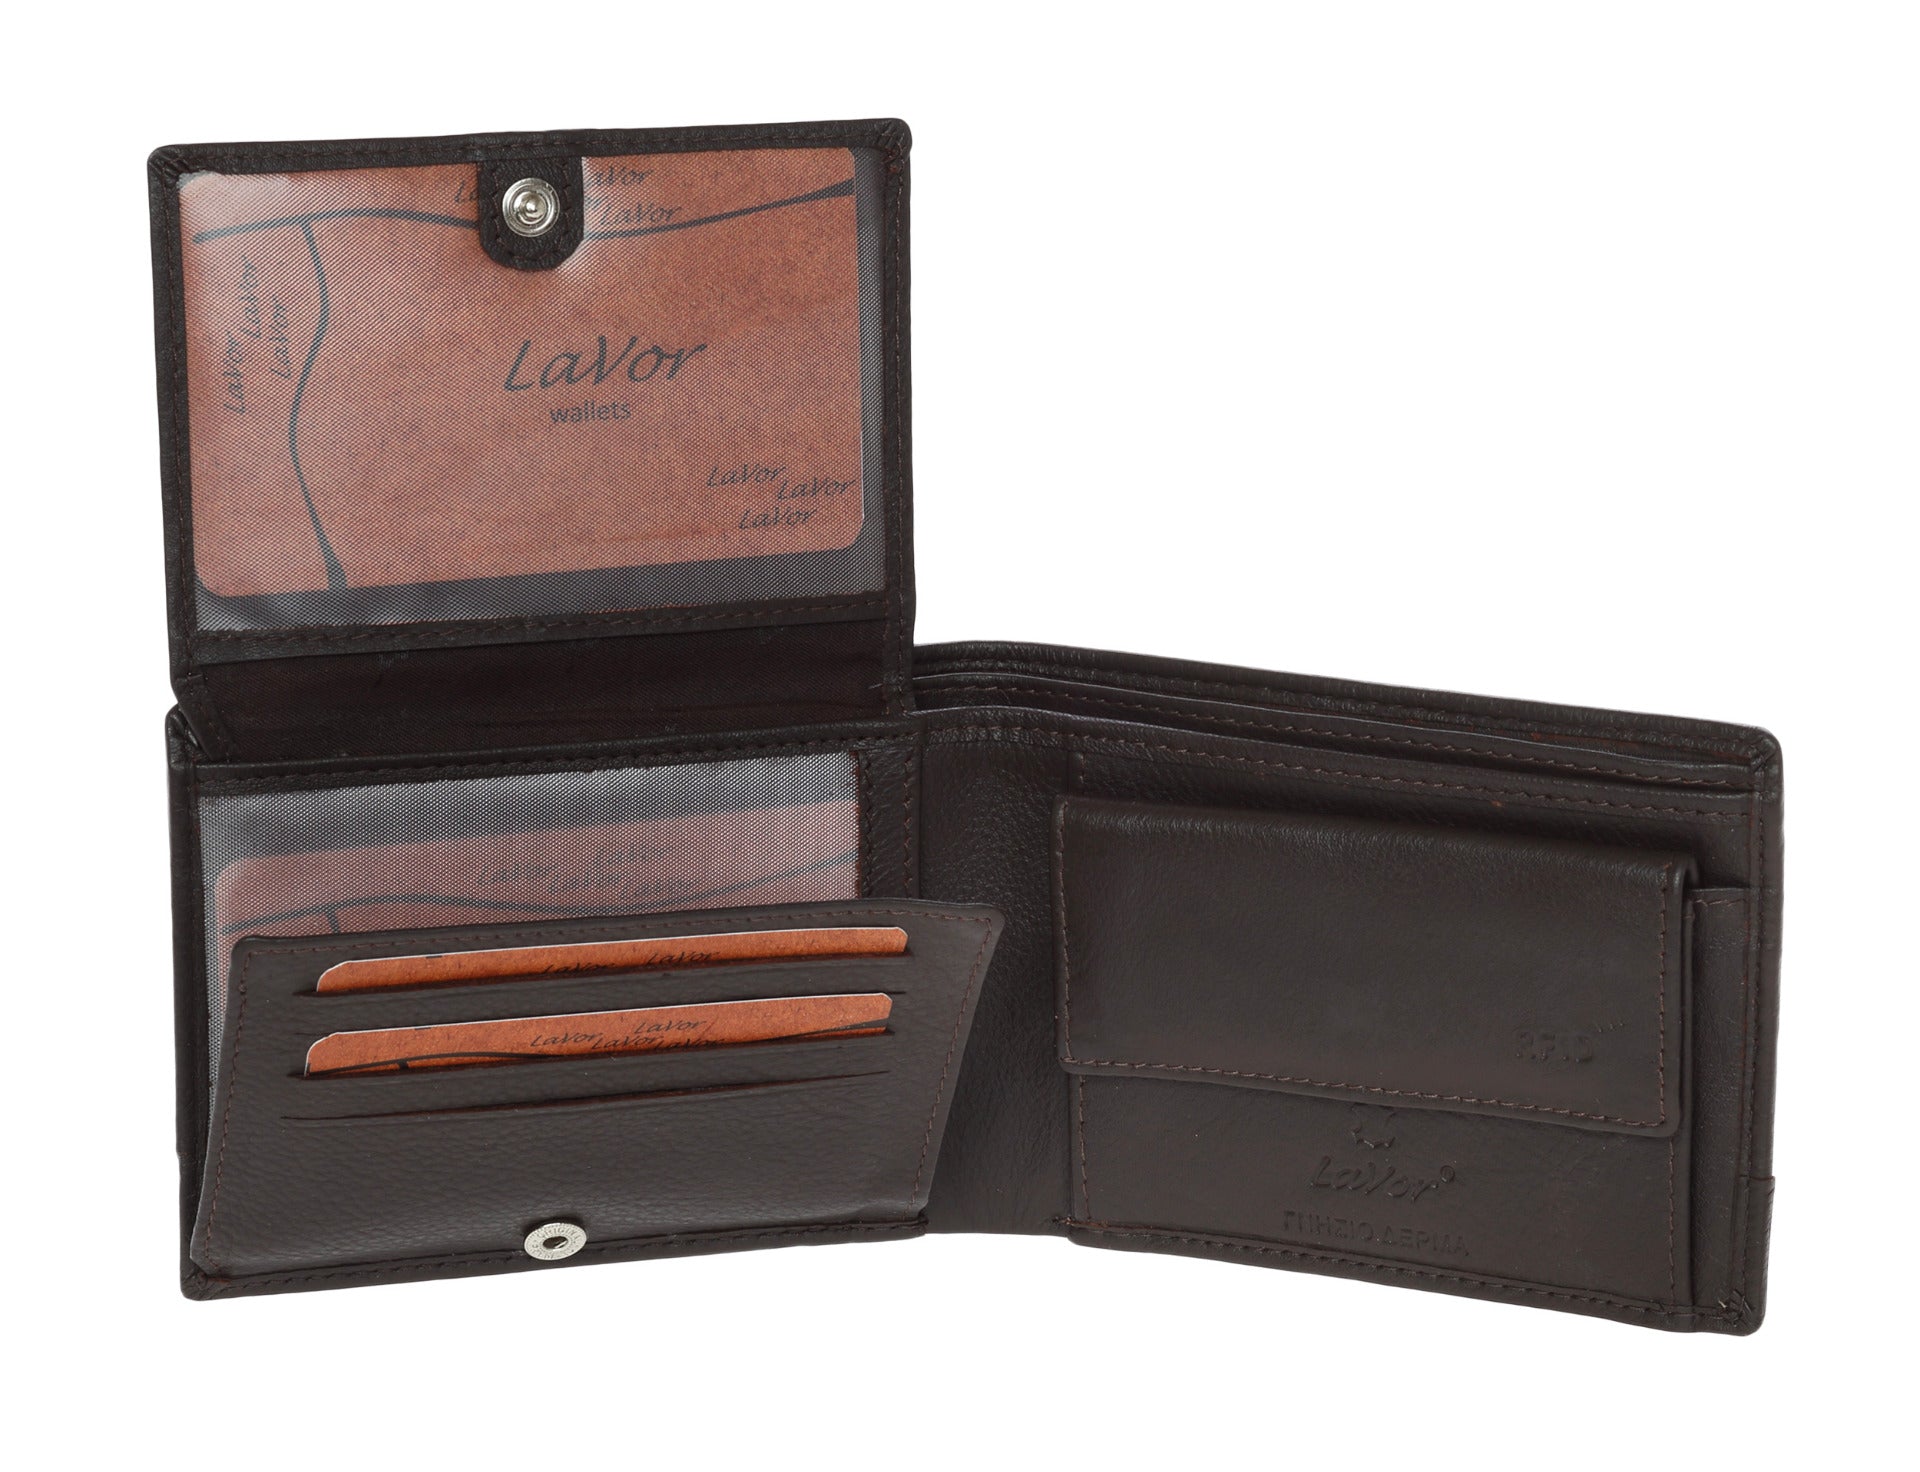 Leather wallet in brown colour. 7249